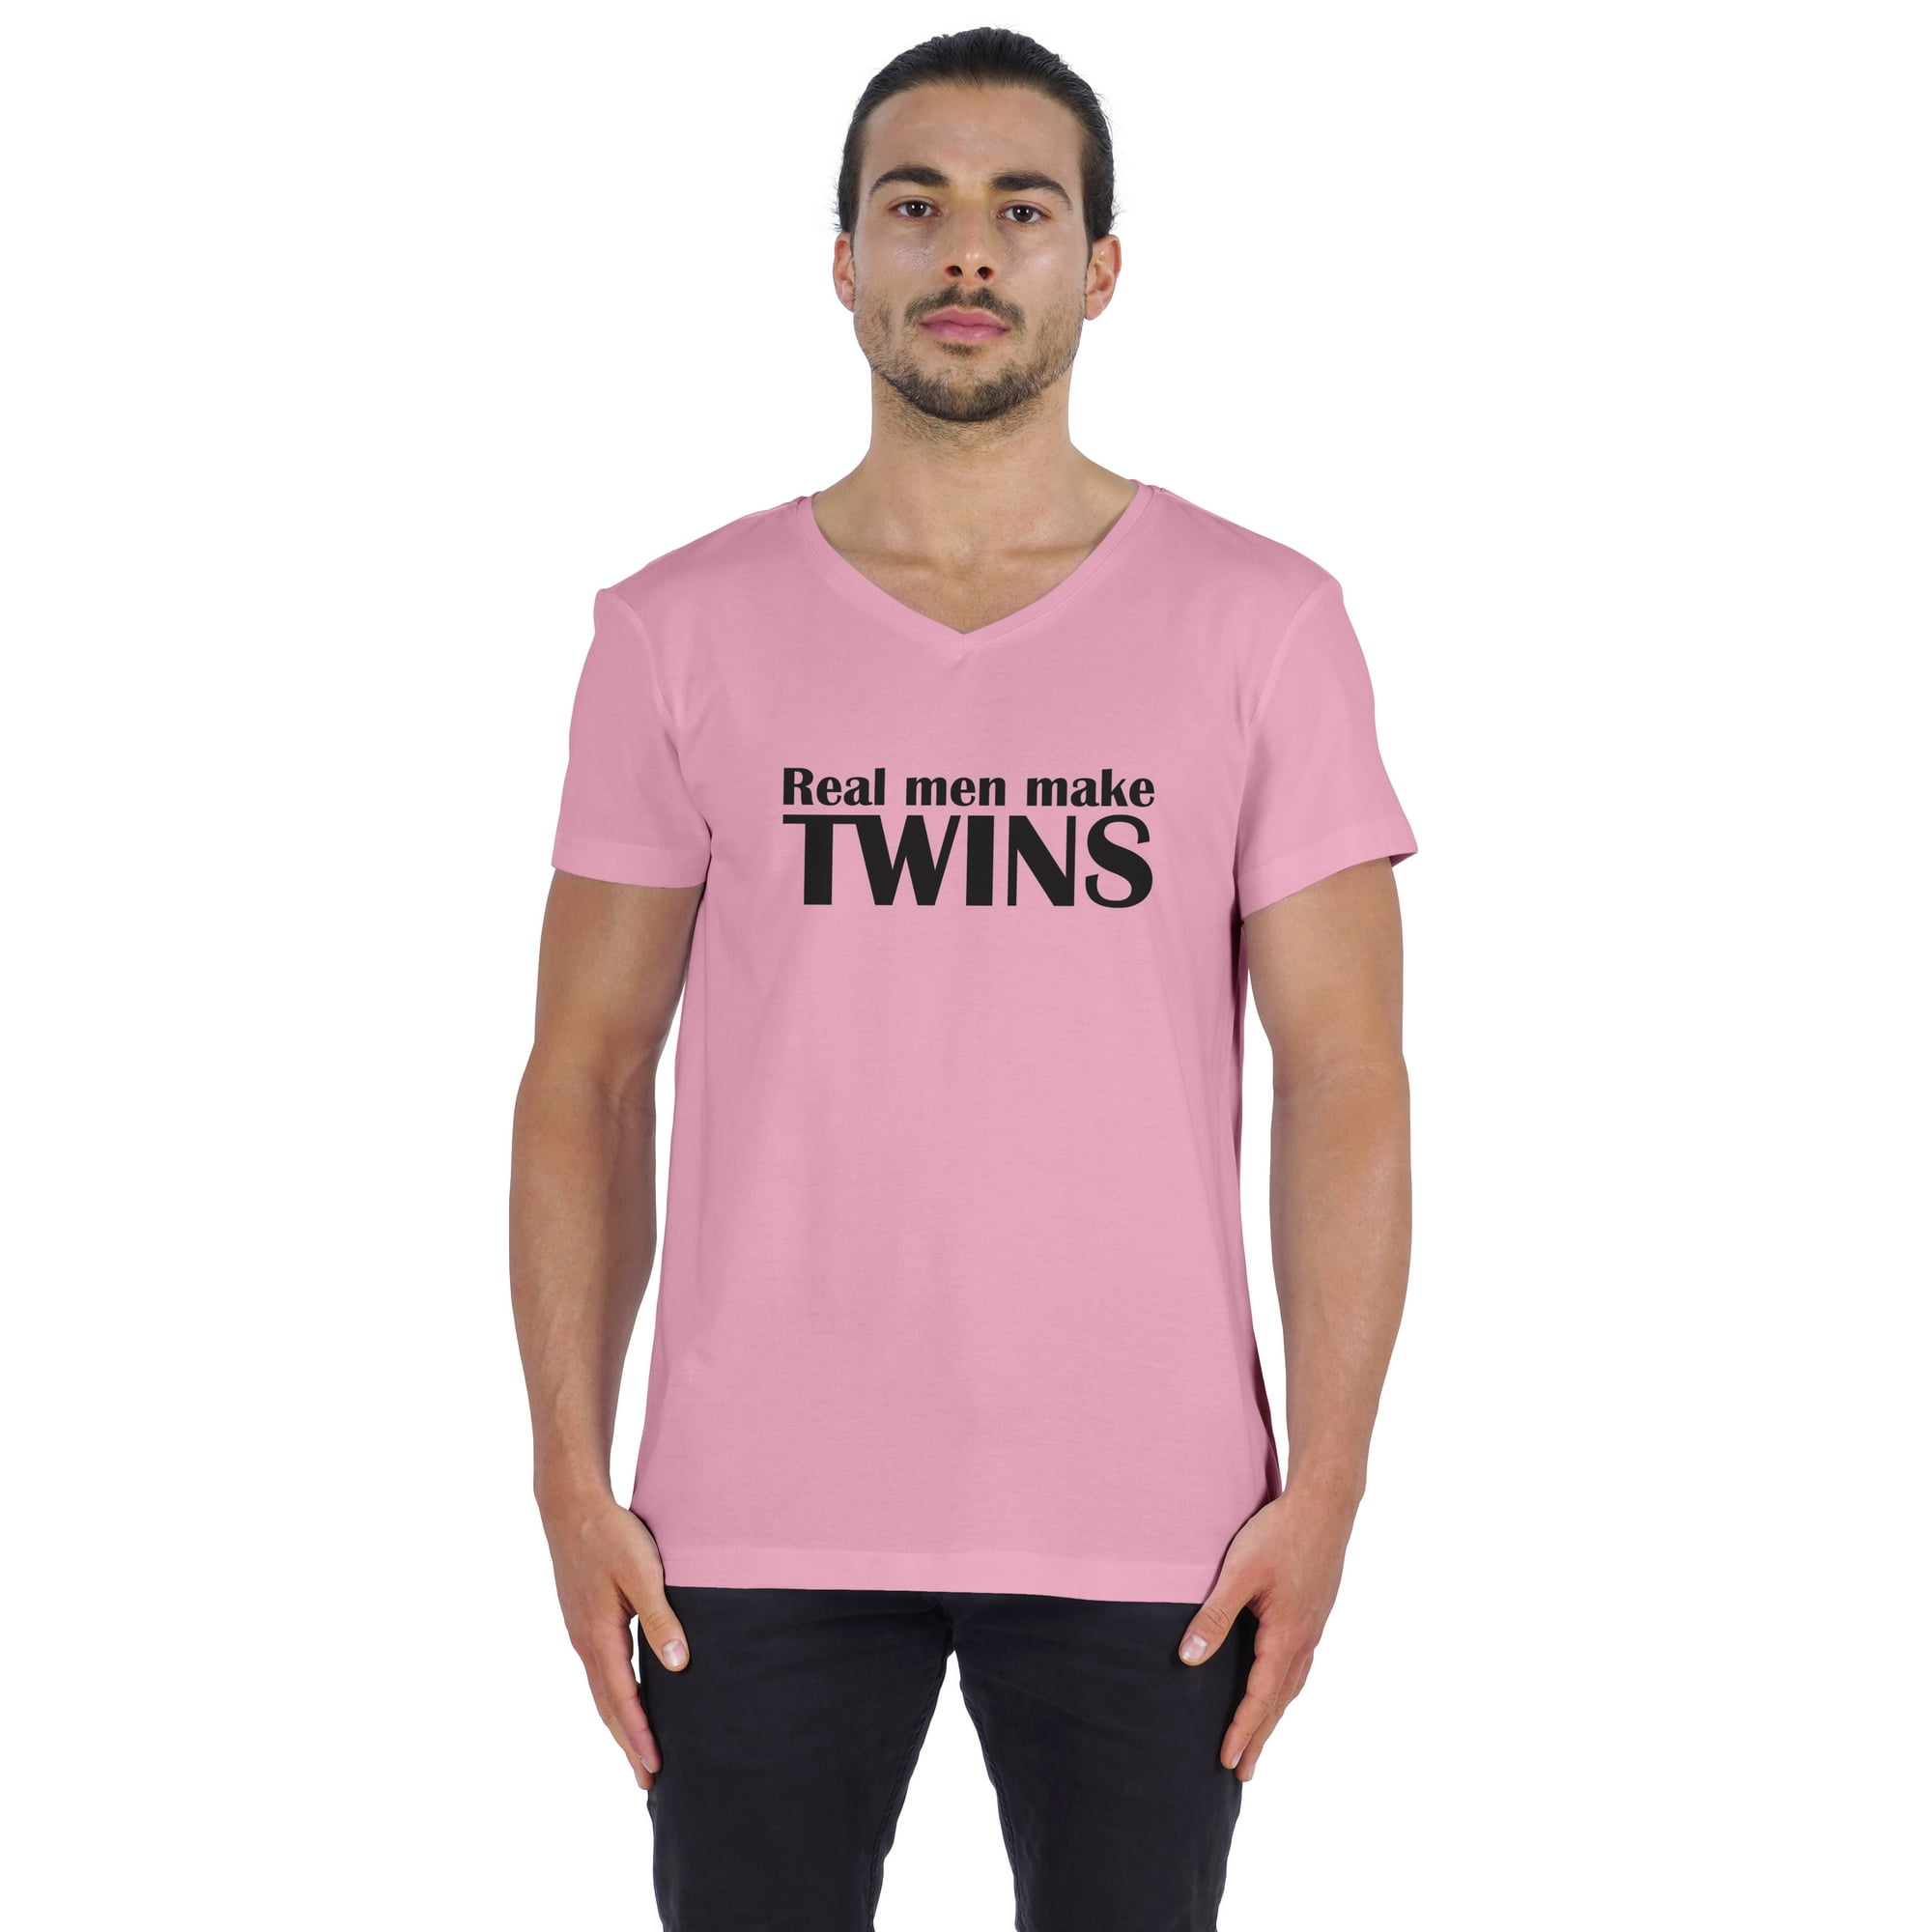 Inkmeso Graphic Tshirt for Twins Baby Dad Real Men Make Twins Tee Shirt Jersey Shirt Daddy Shirt, Infant Boy's, Size: 3XL, Pink